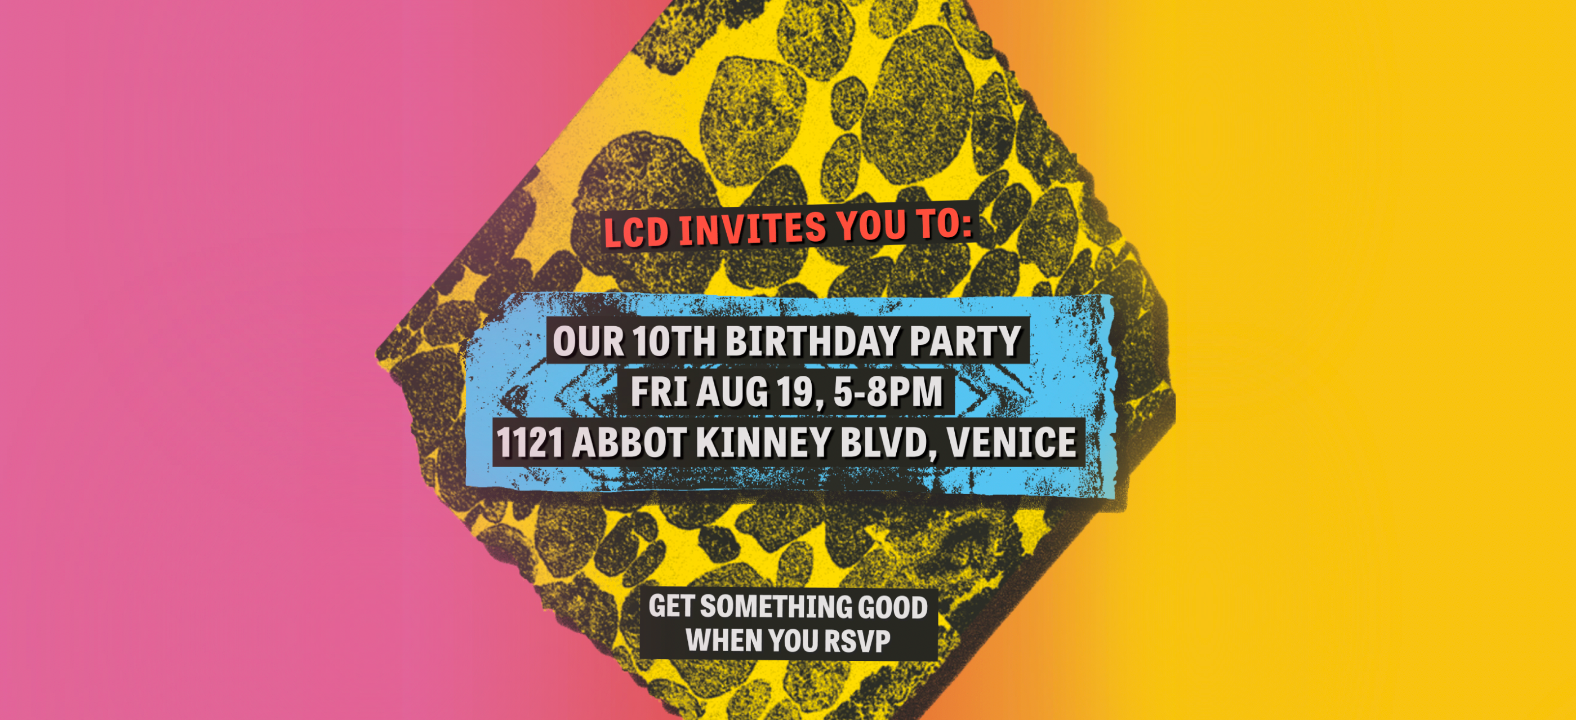 Photo of LCD 10th birthday party invite.